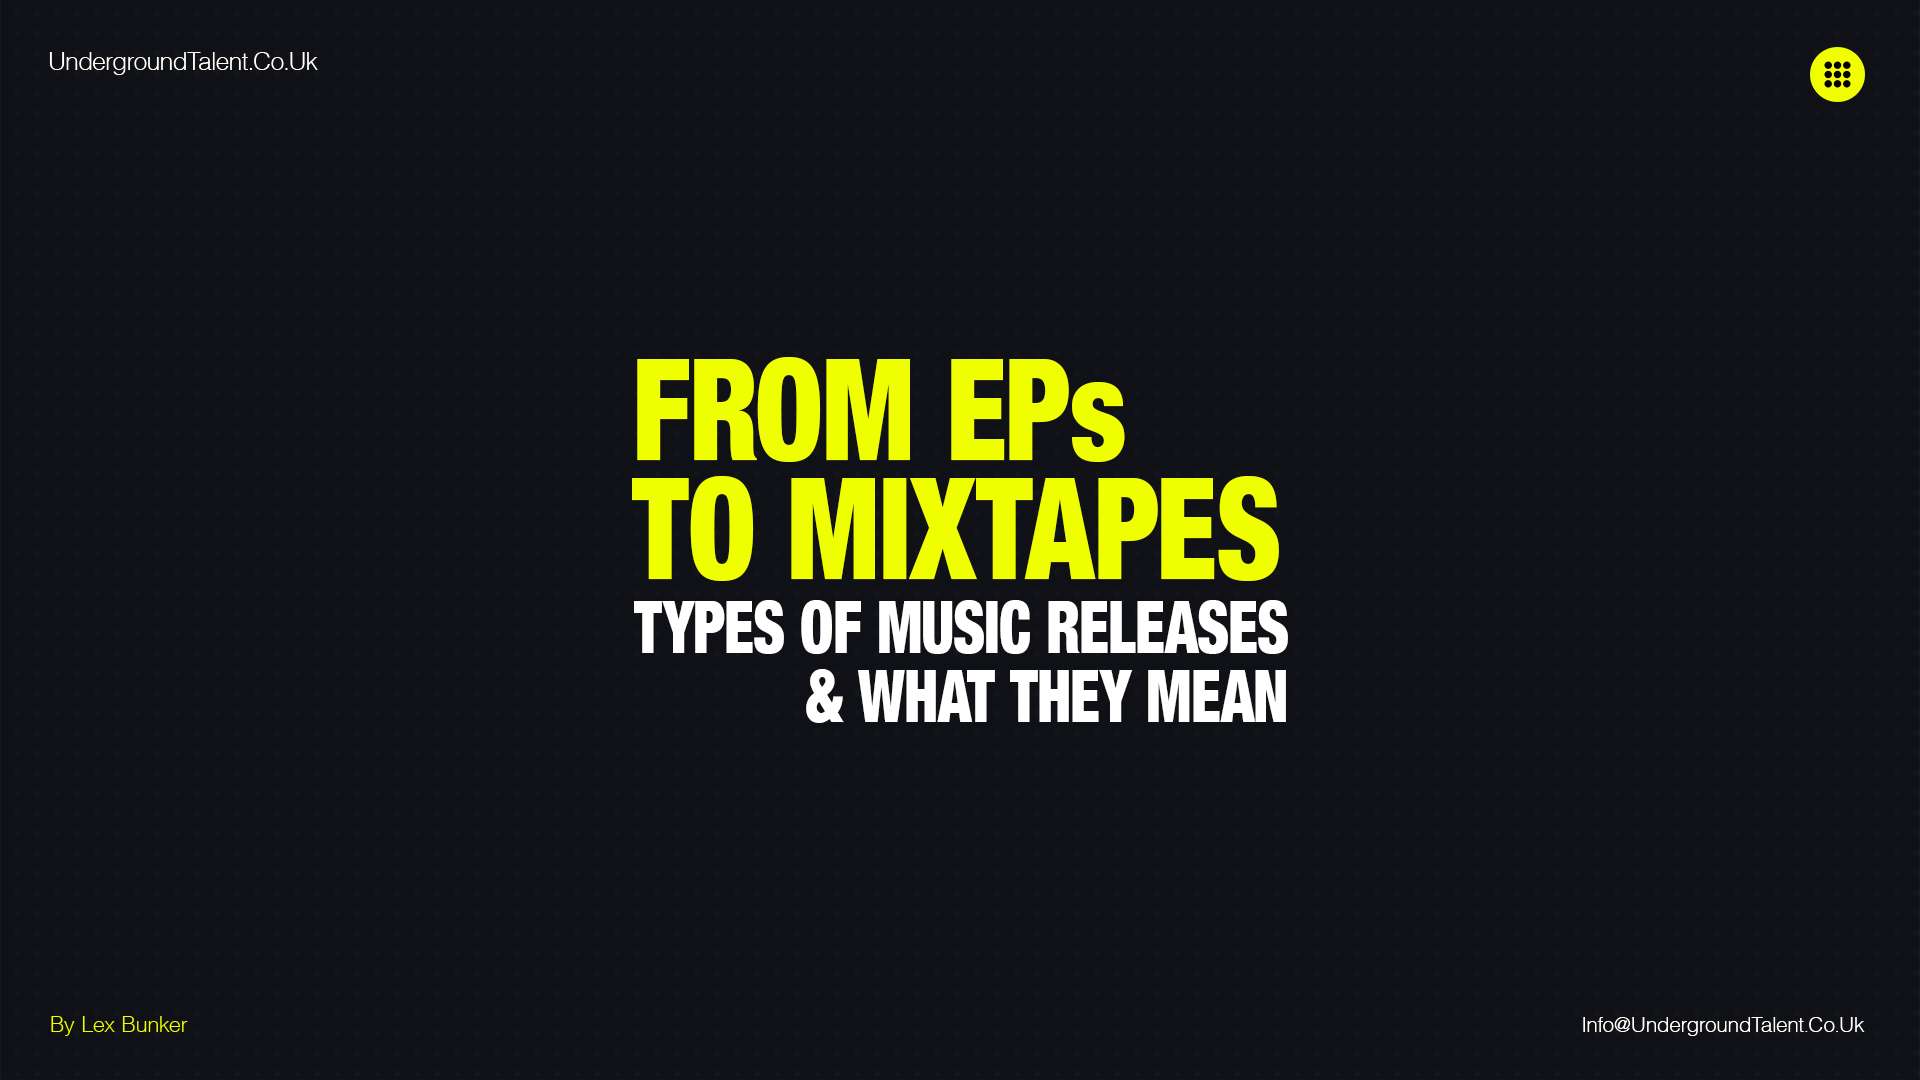 Types of Music Releases & What they Mean, From EPs to Mixtapes